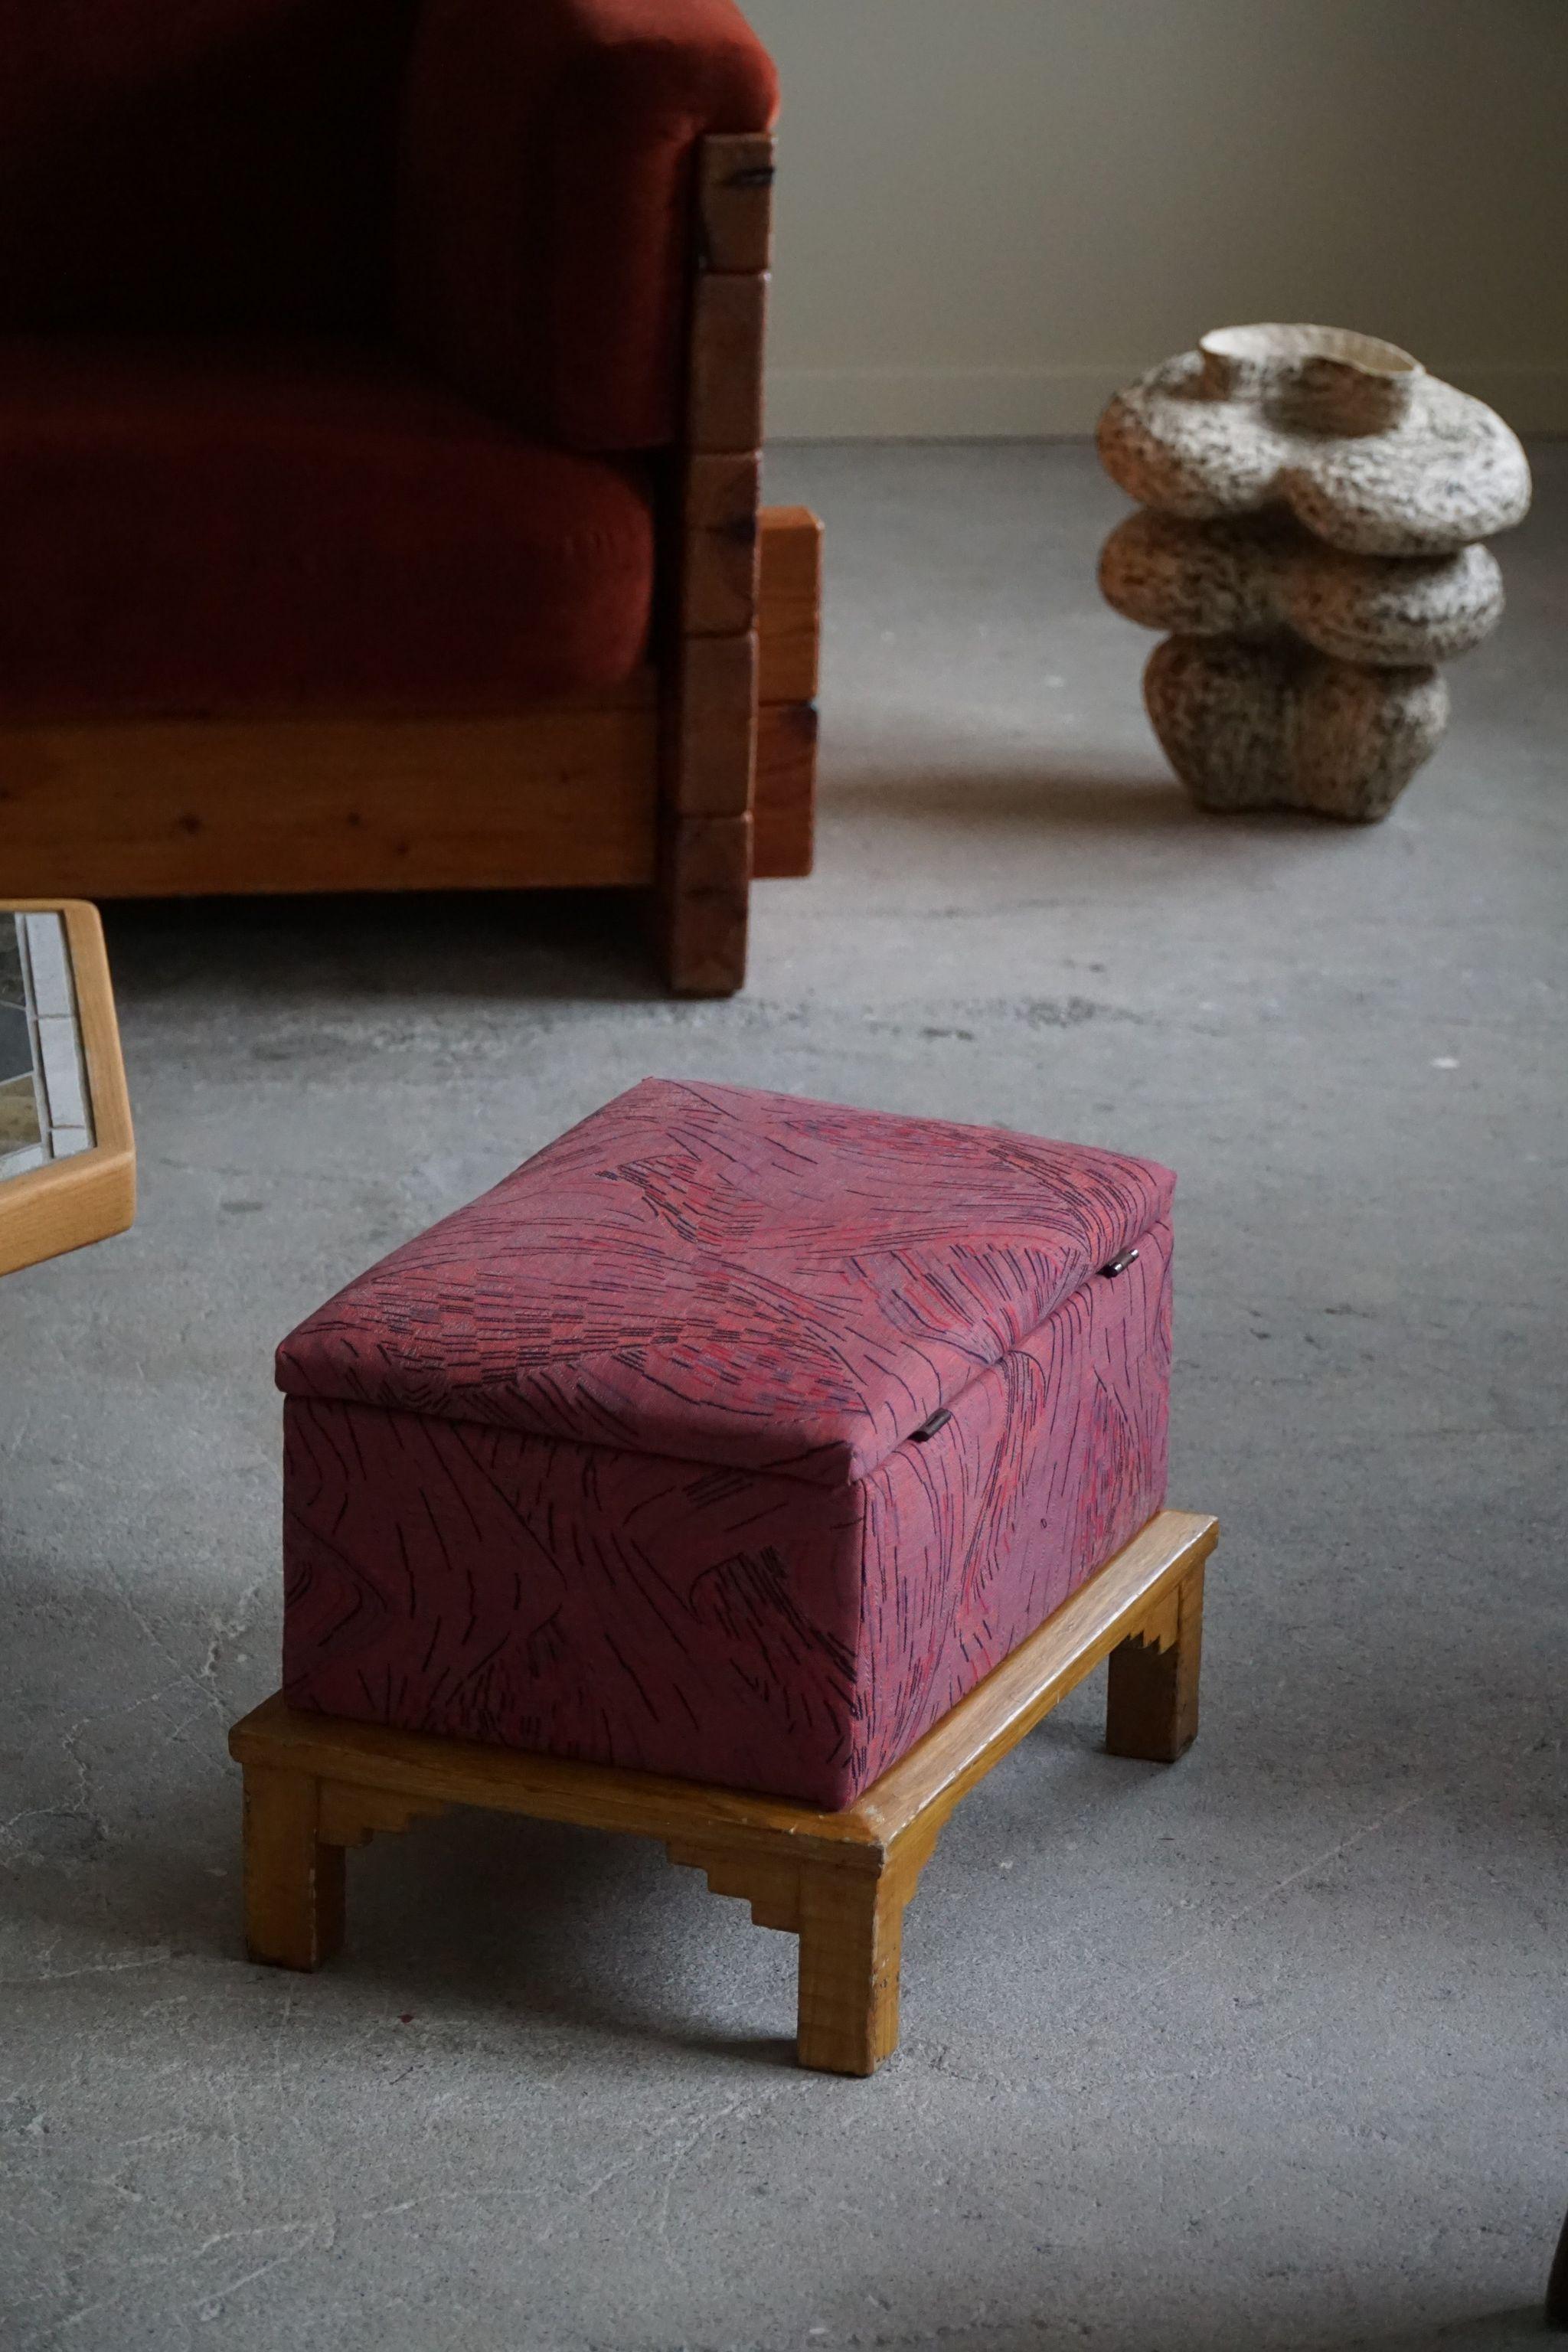 French Art Deco, Sculptural Stool with Storage, Reupholstered, Made in the 1940s For Sale 3